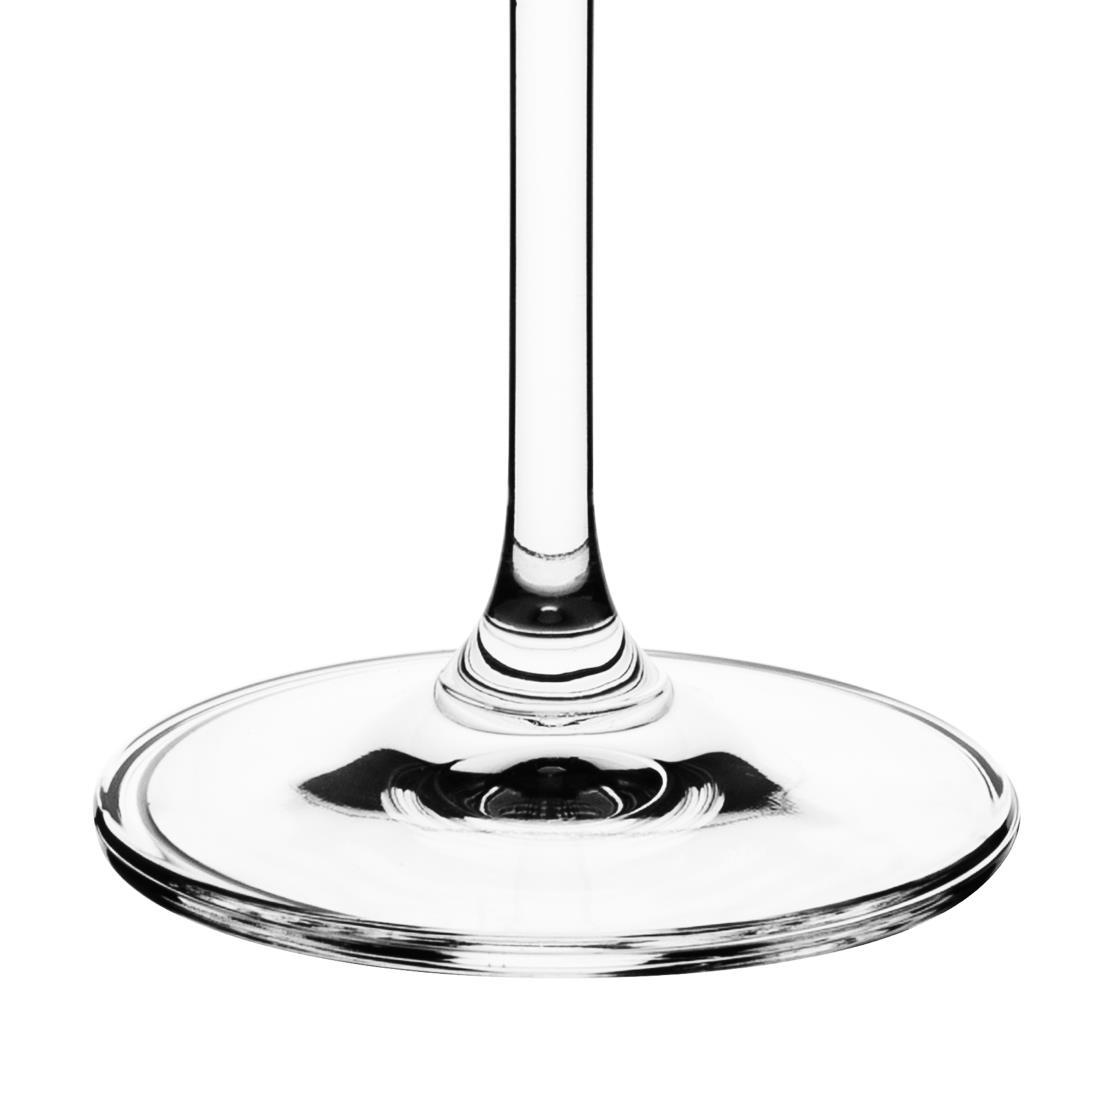 Olympia Chime Crystal Wine Glasses 365ml (Pack of 6) - GF733  - 3